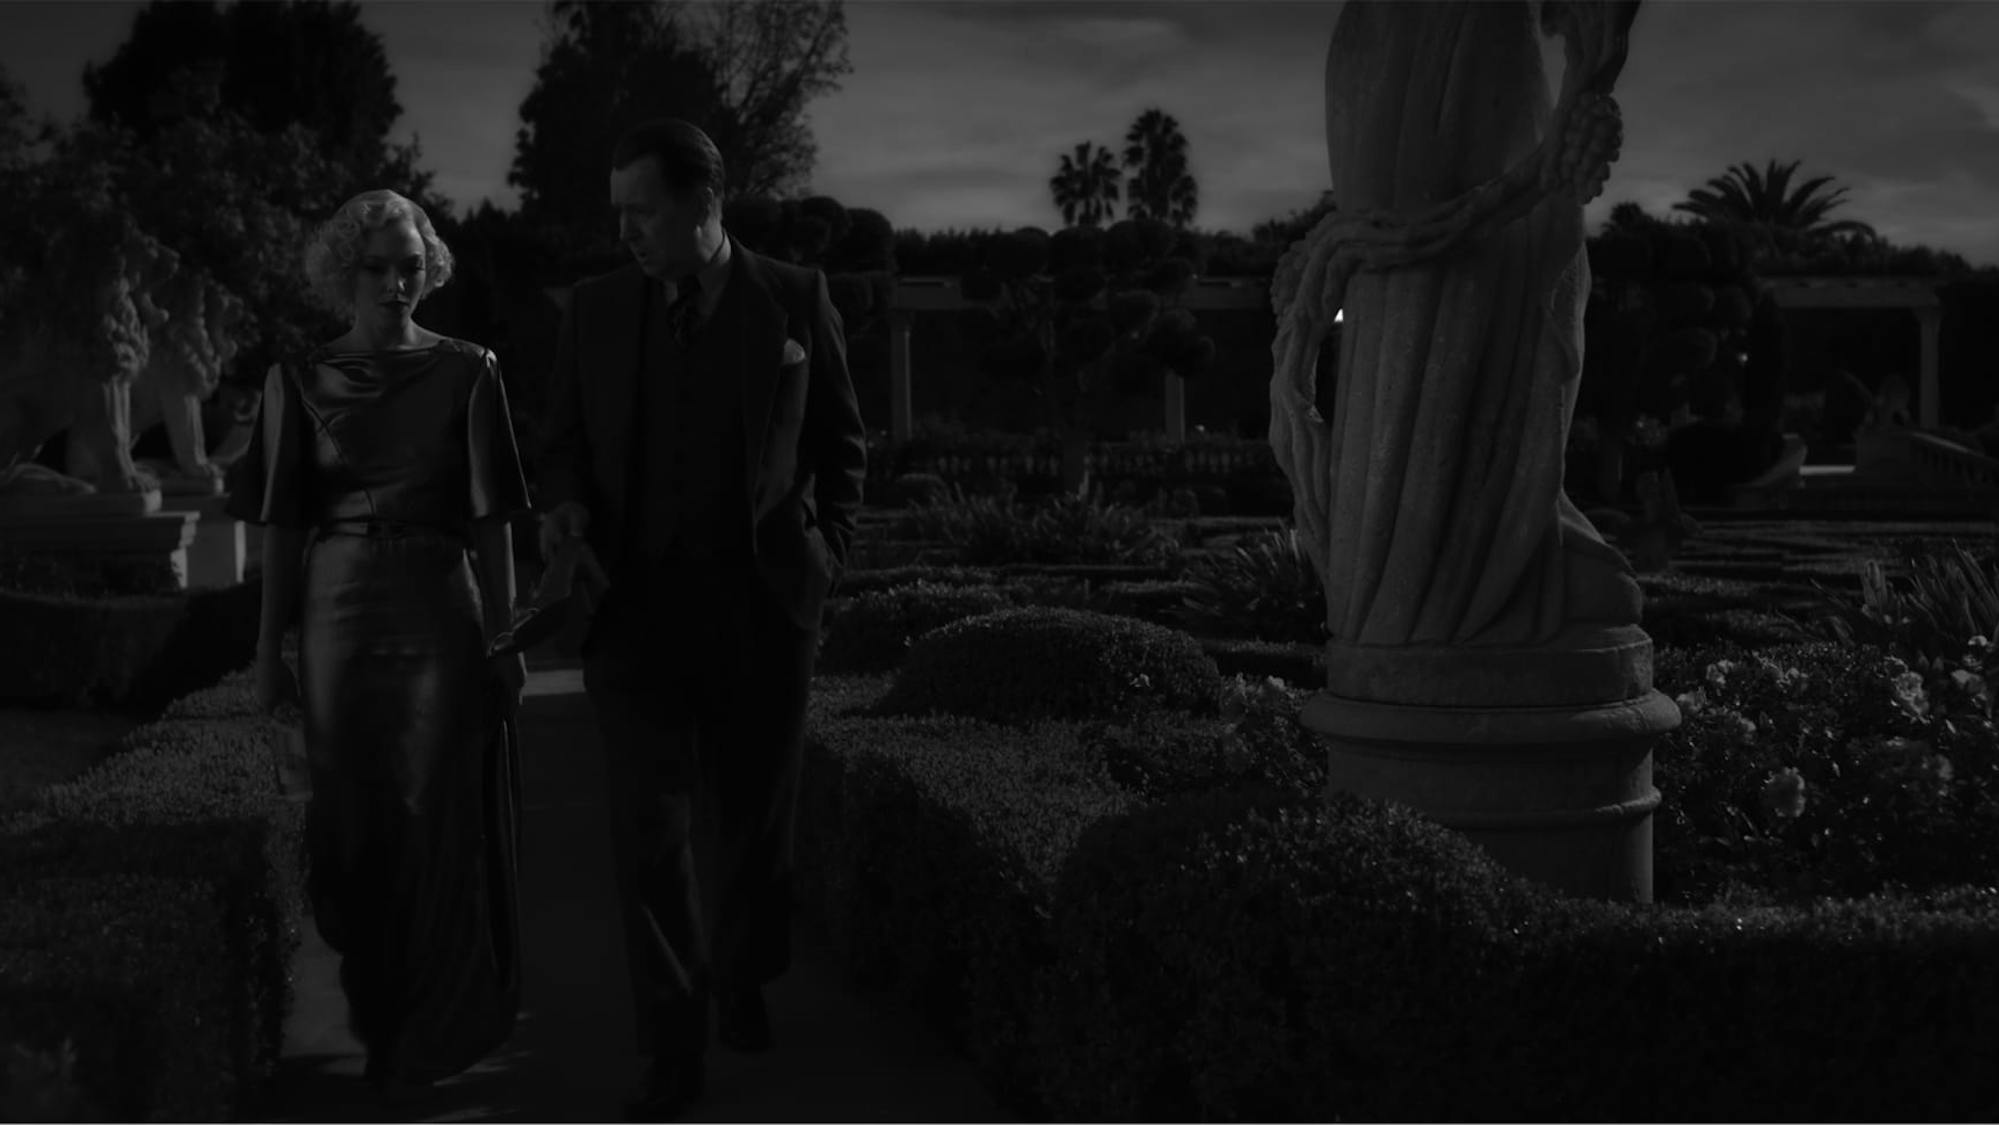 In a shot from the film, we see how the vibrant colors from the image above translate to a black-and-white experience. Light and shadow play off of Seyfriend’s shimmering dress and around statues and greenery on the grounds. 